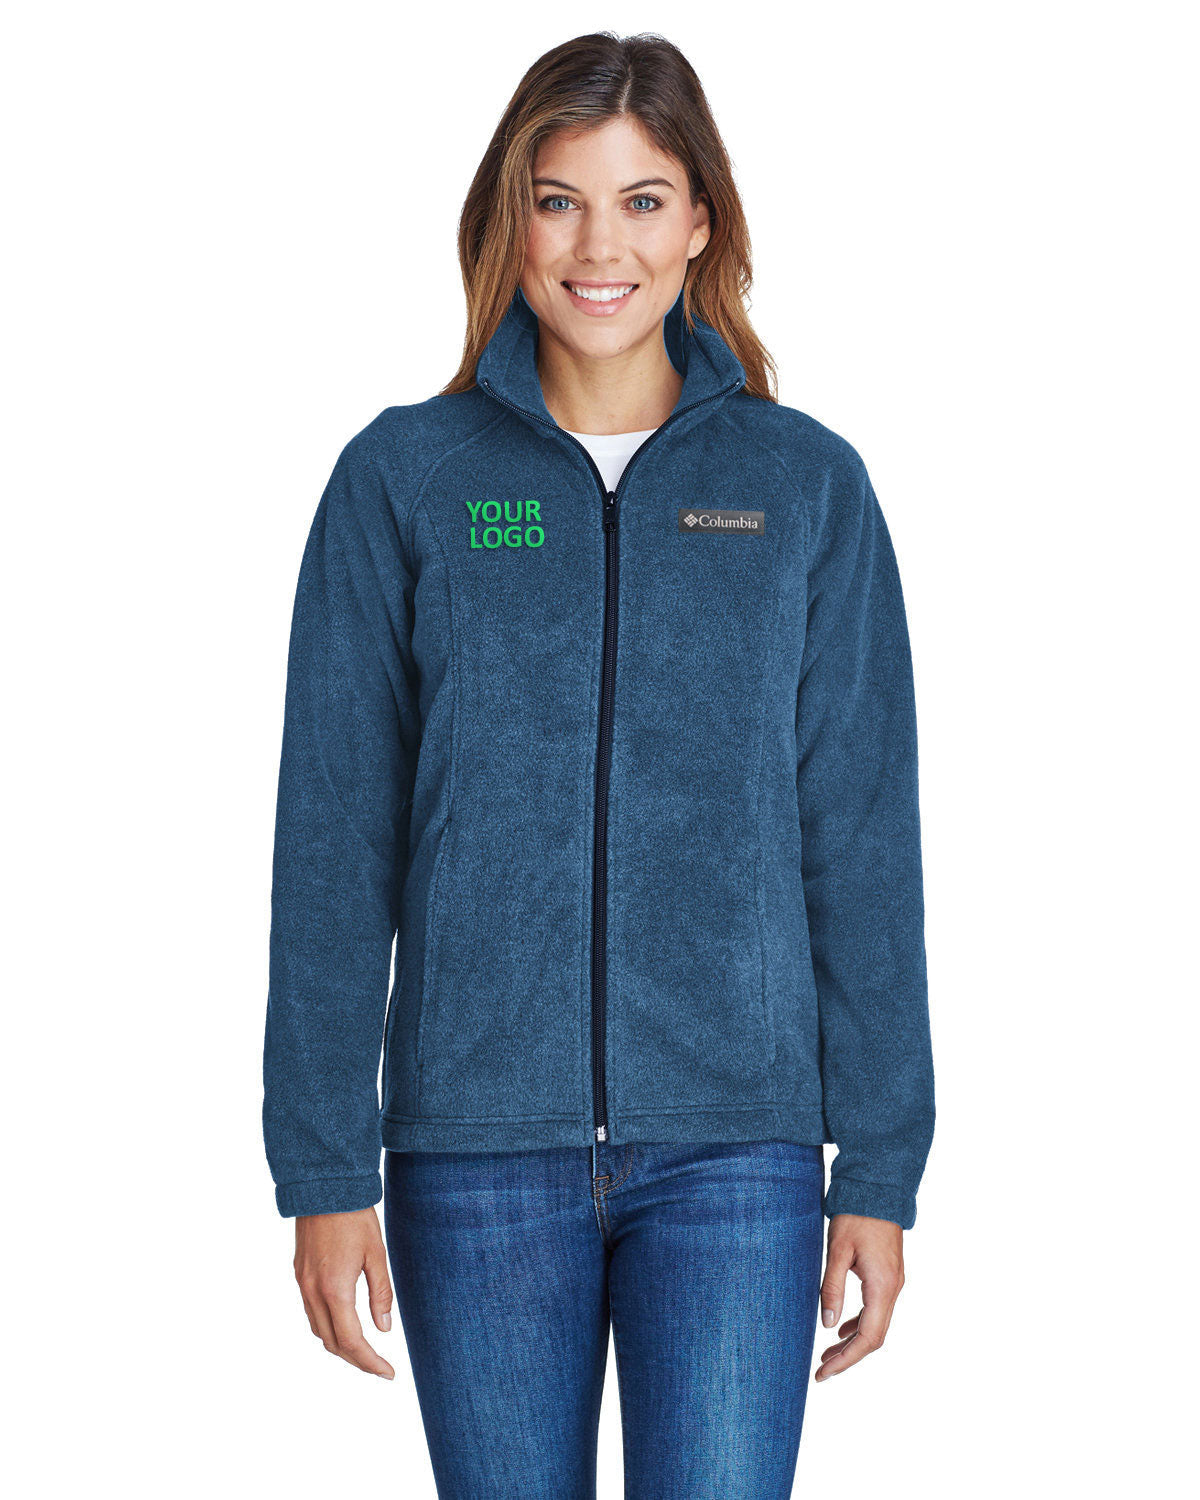 Columbia Columbia Navy 6439 embroidered jackets for business